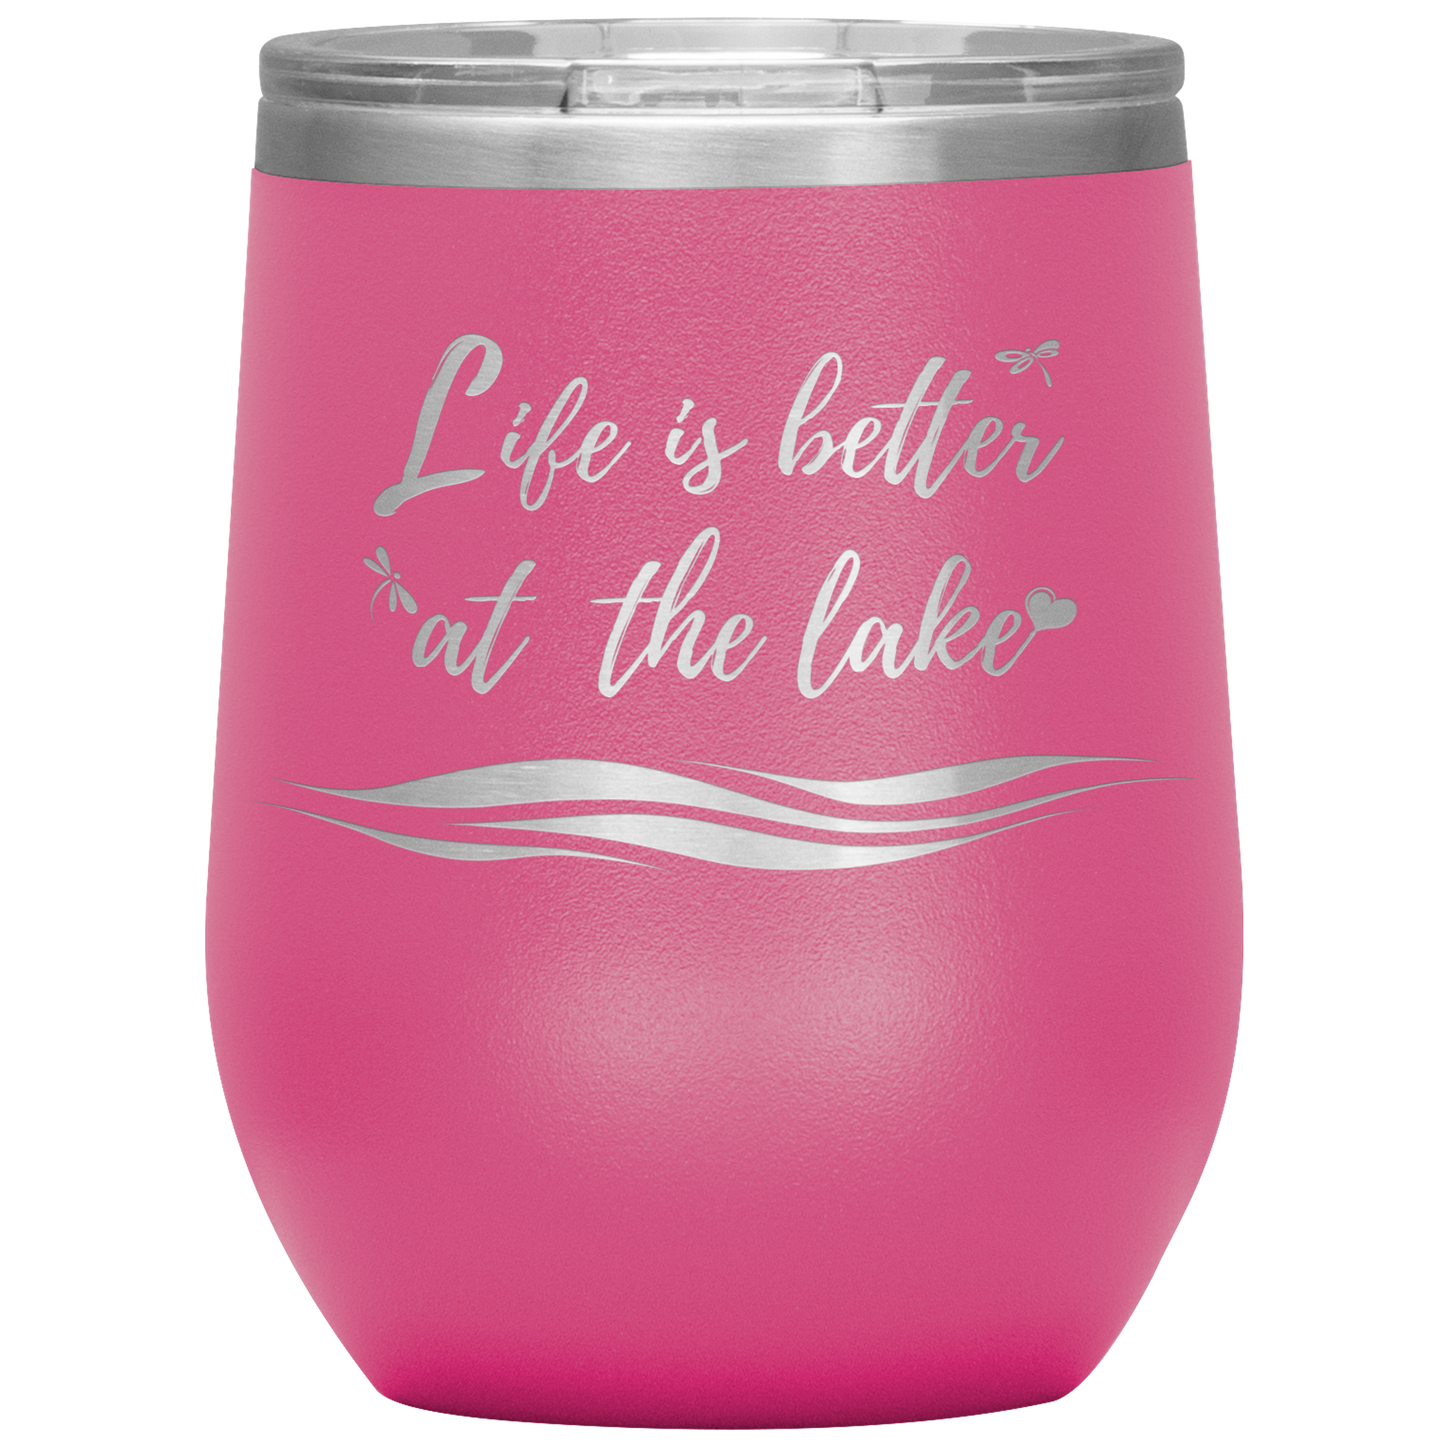 Life is better at the lake - Wine Tumbler